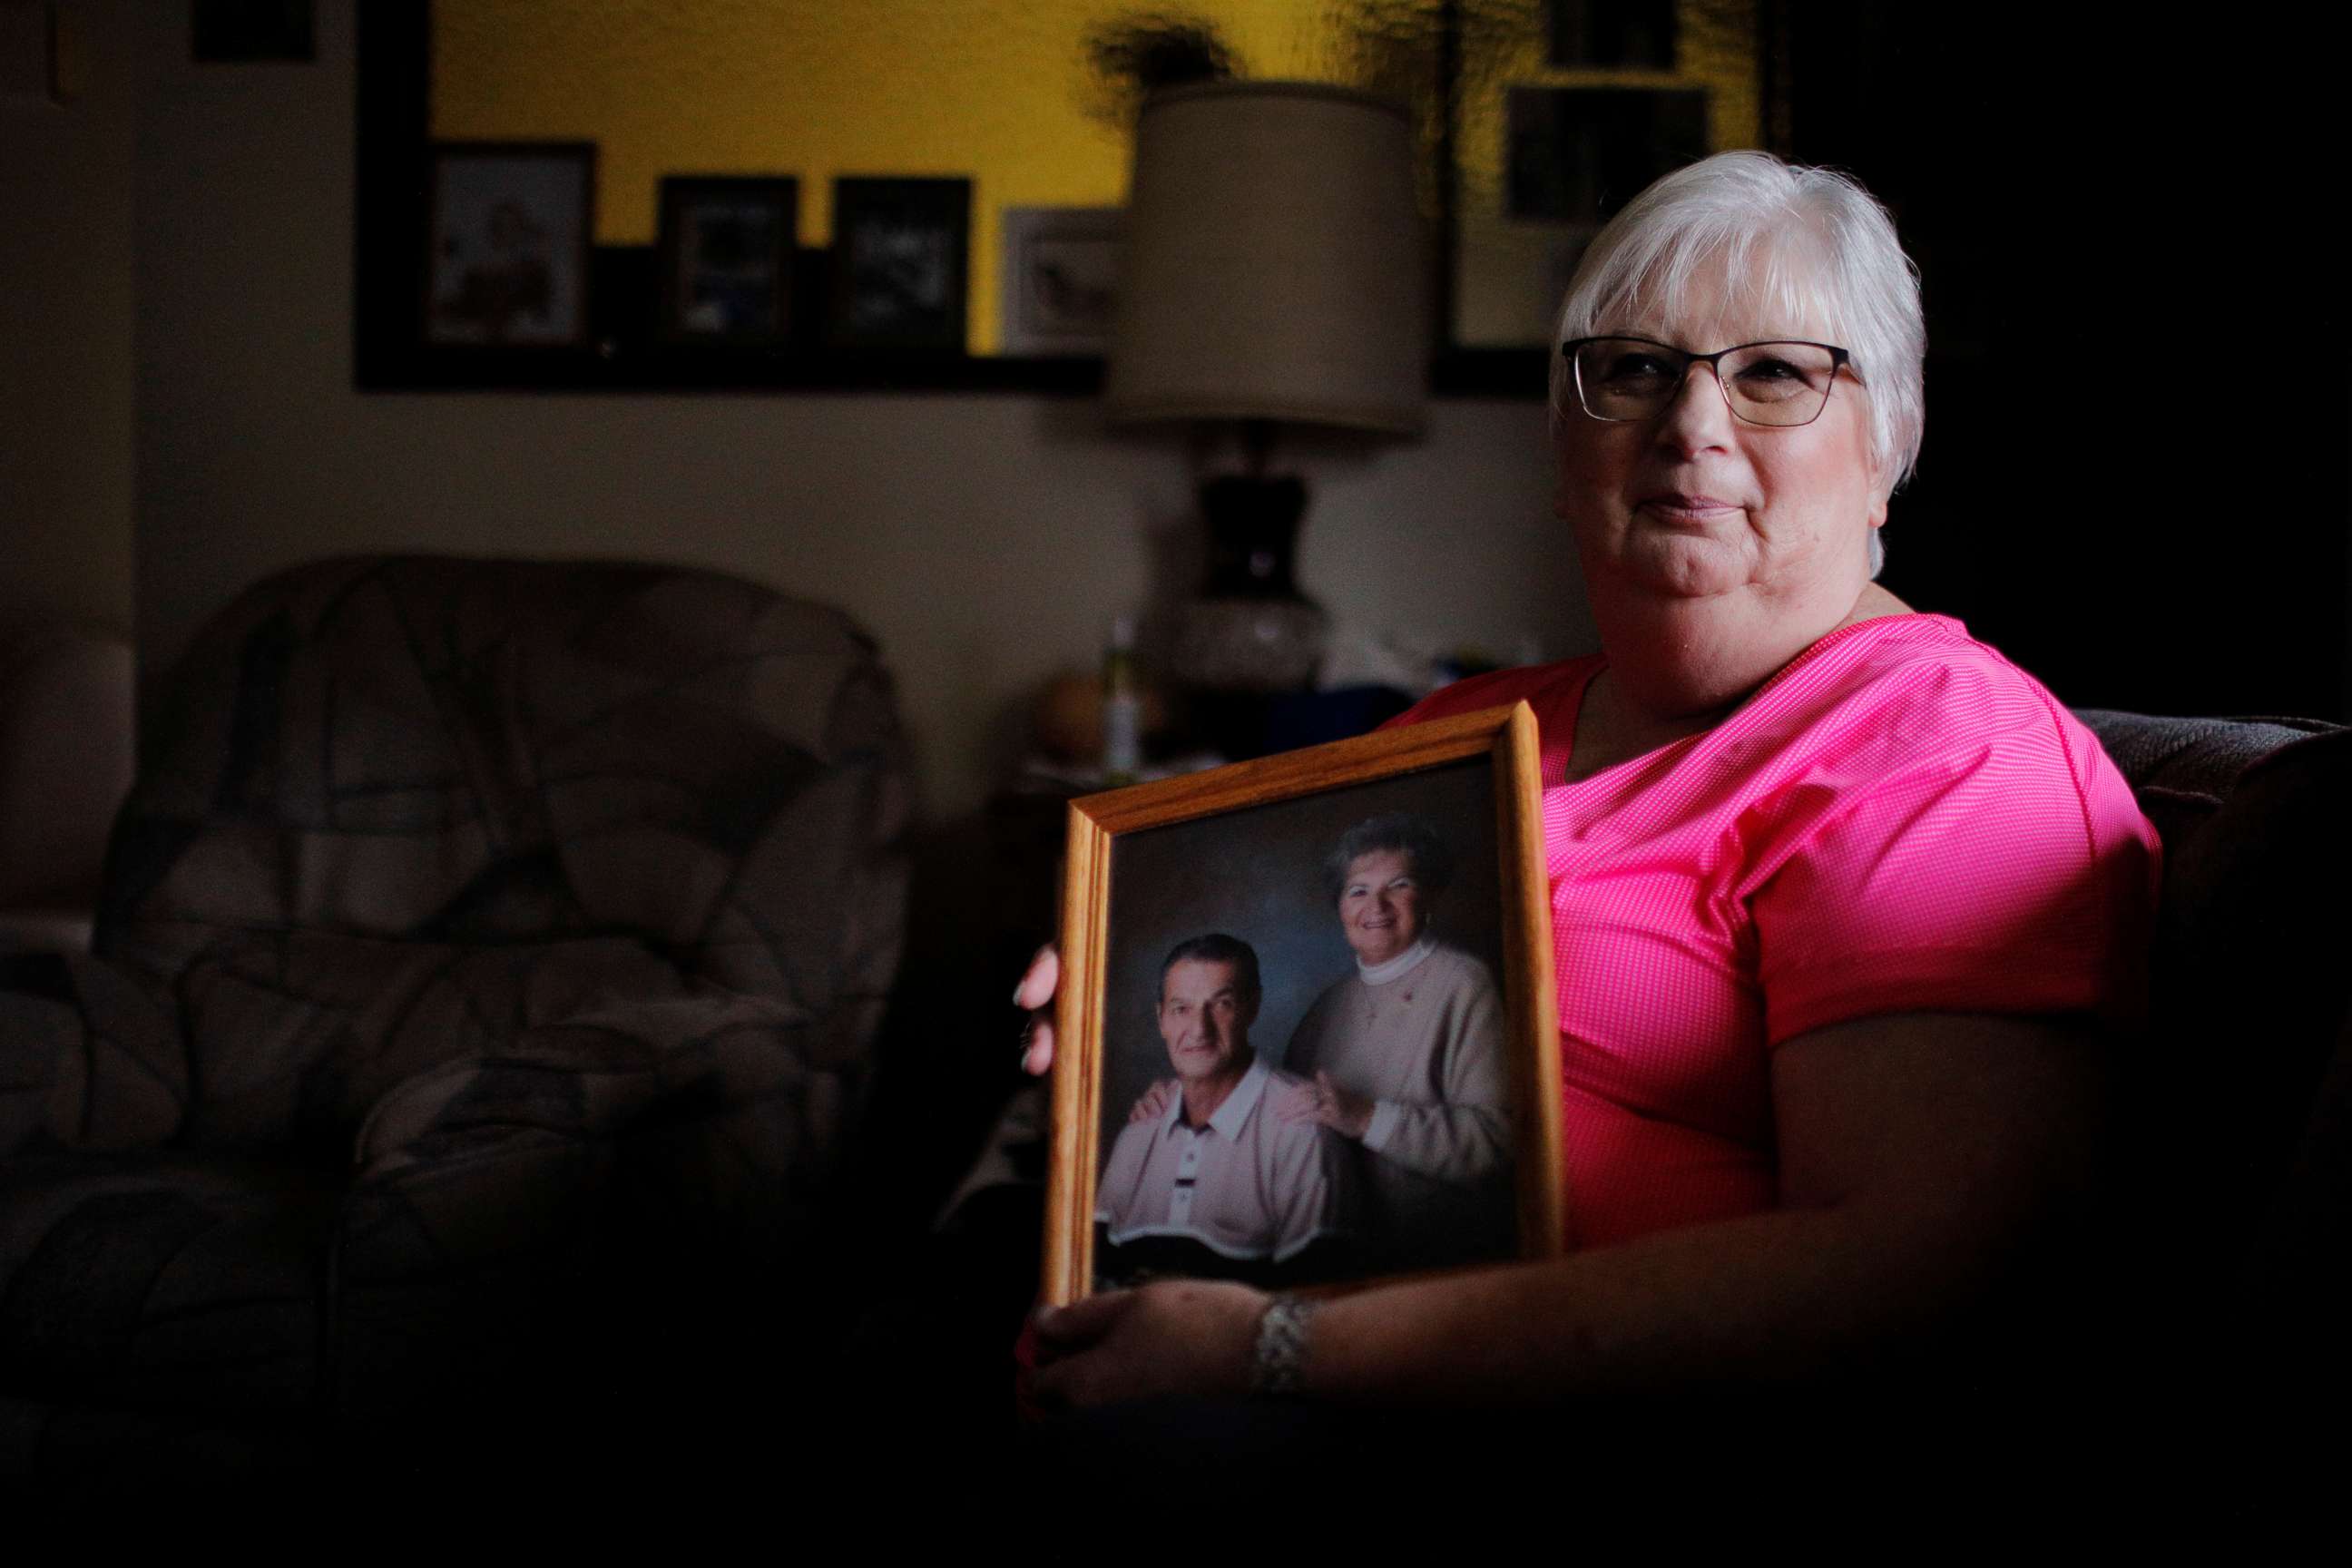 PHOTO: Debbie de los Angeles, holds a photograph of her mother Twilla Morin who died from coronavirus at the Life Care Center of Kirkland, while posing for a portrait at her home in Monroe, Washington, March 23, 2020. 